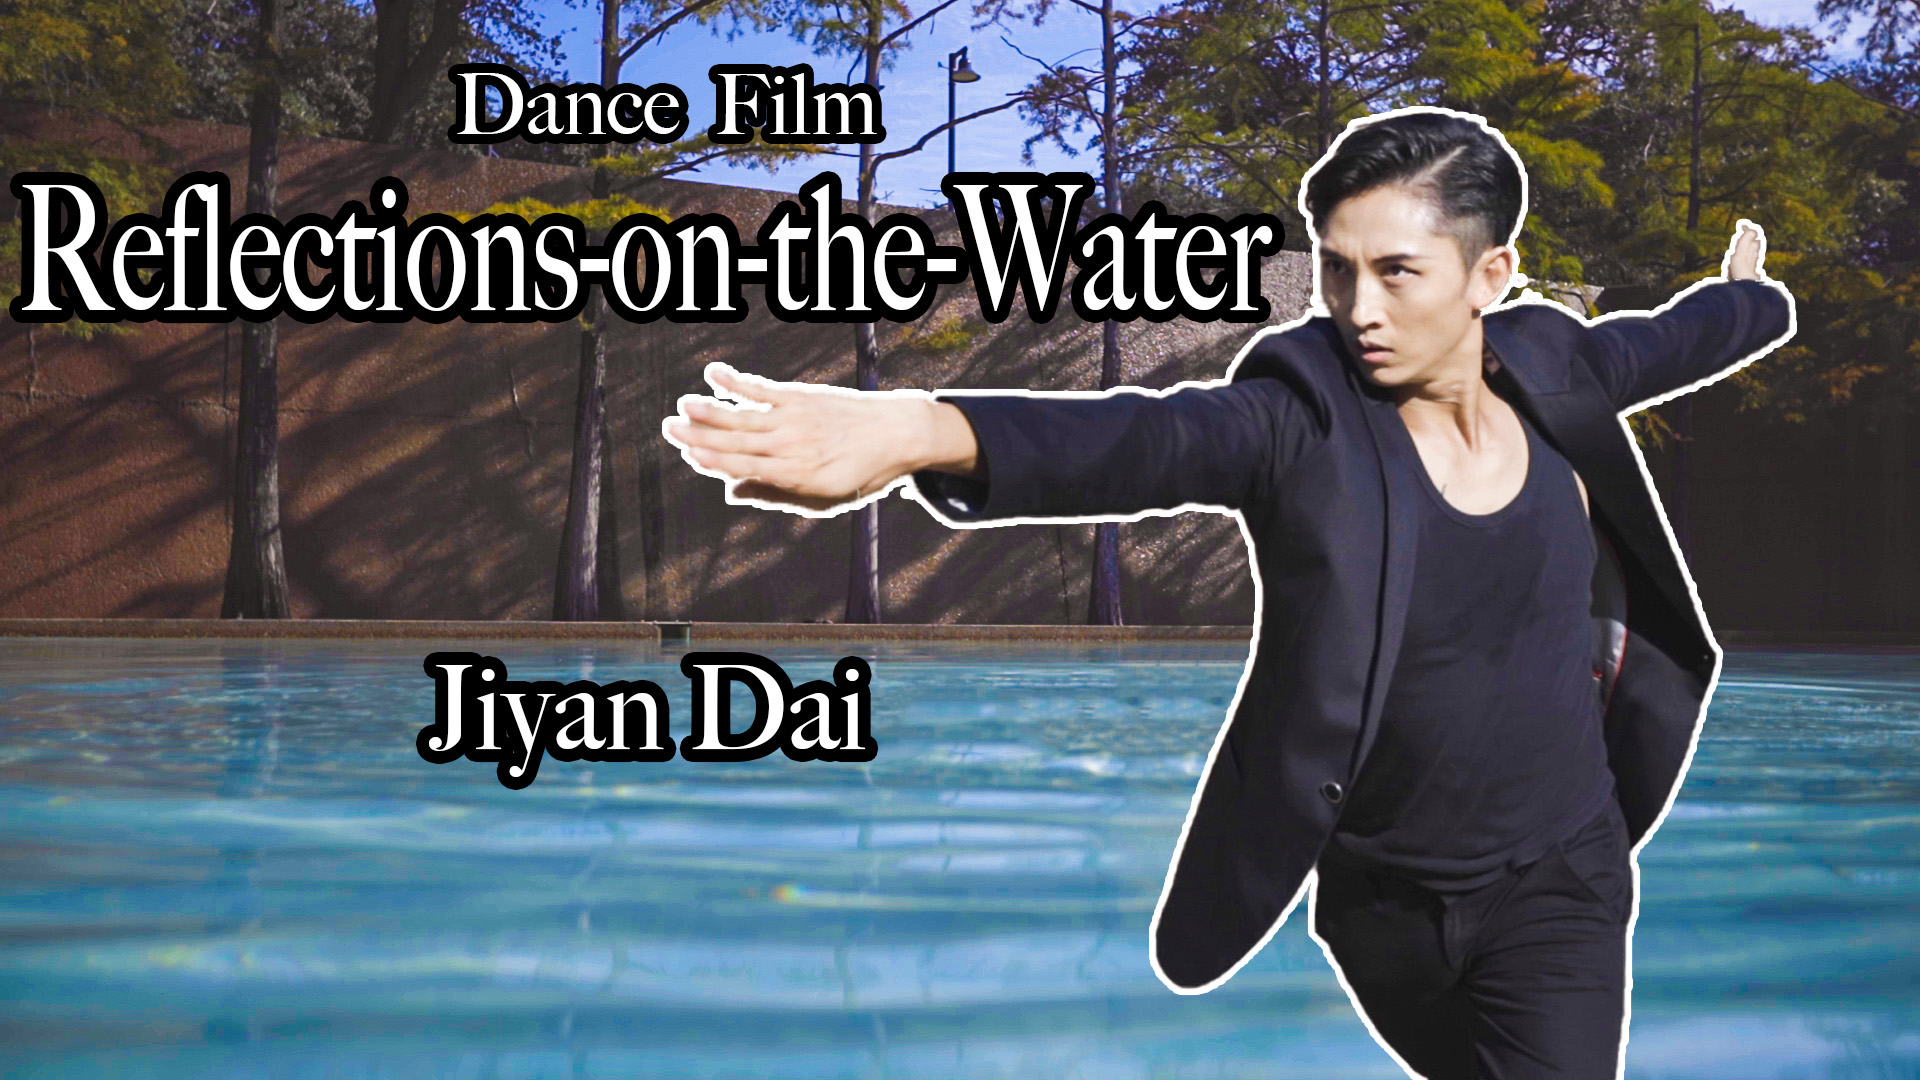 Opening slide of Jiyan Dai's Reflections on the Water, featuring Dai superimposed in front of the Fort Worth Water Gardens.